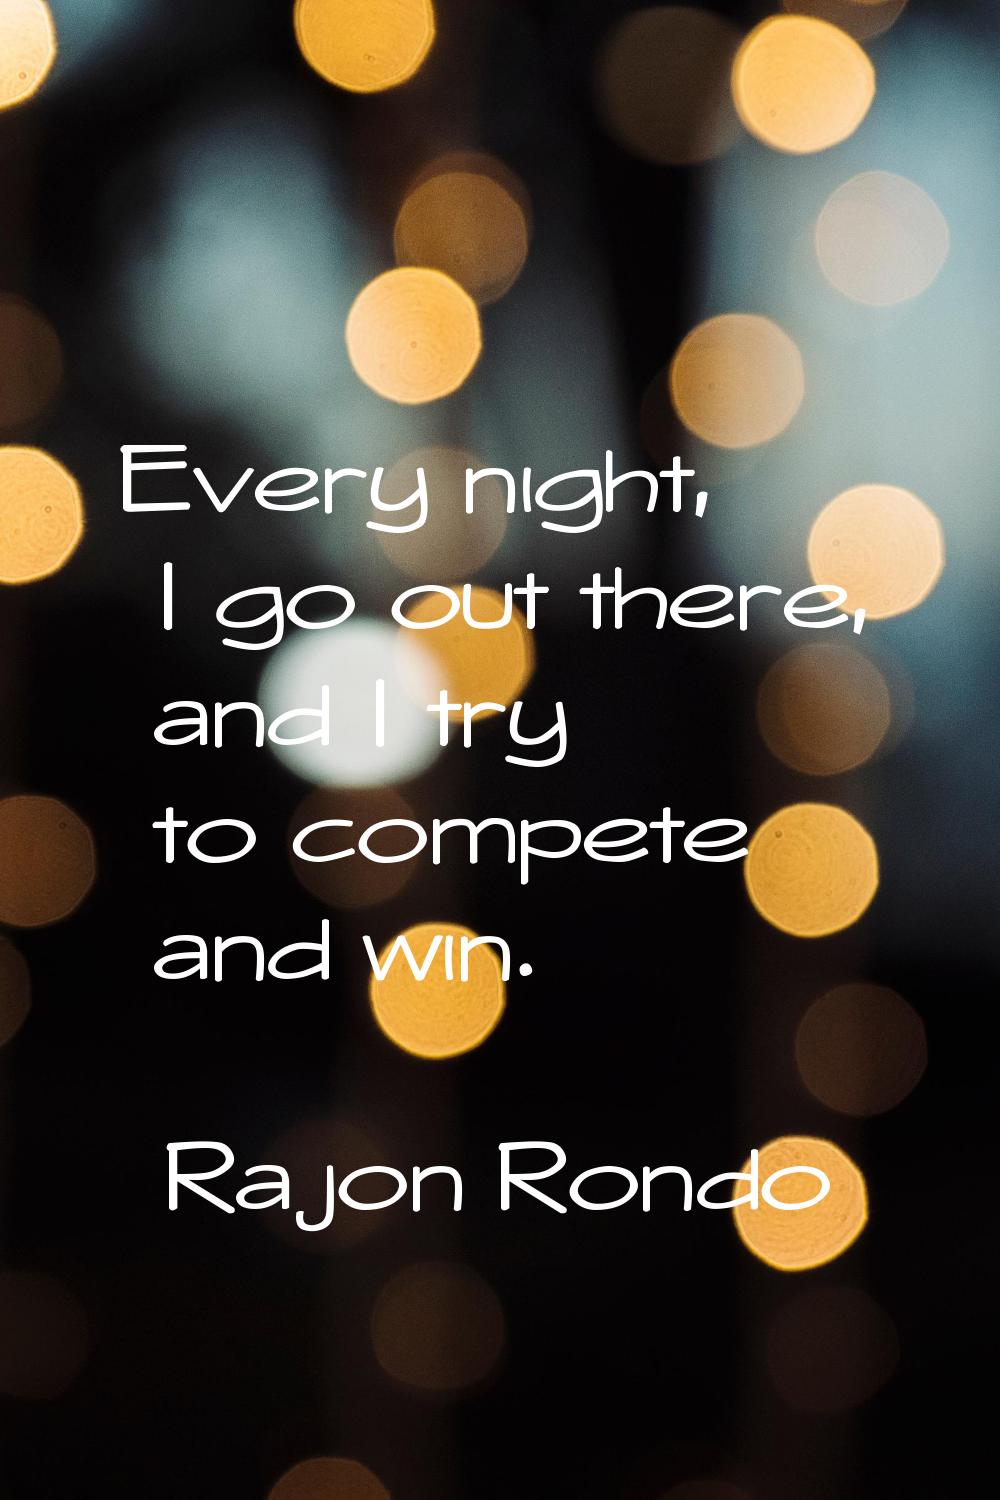 Every night, I go out there, and I try to compete and win.